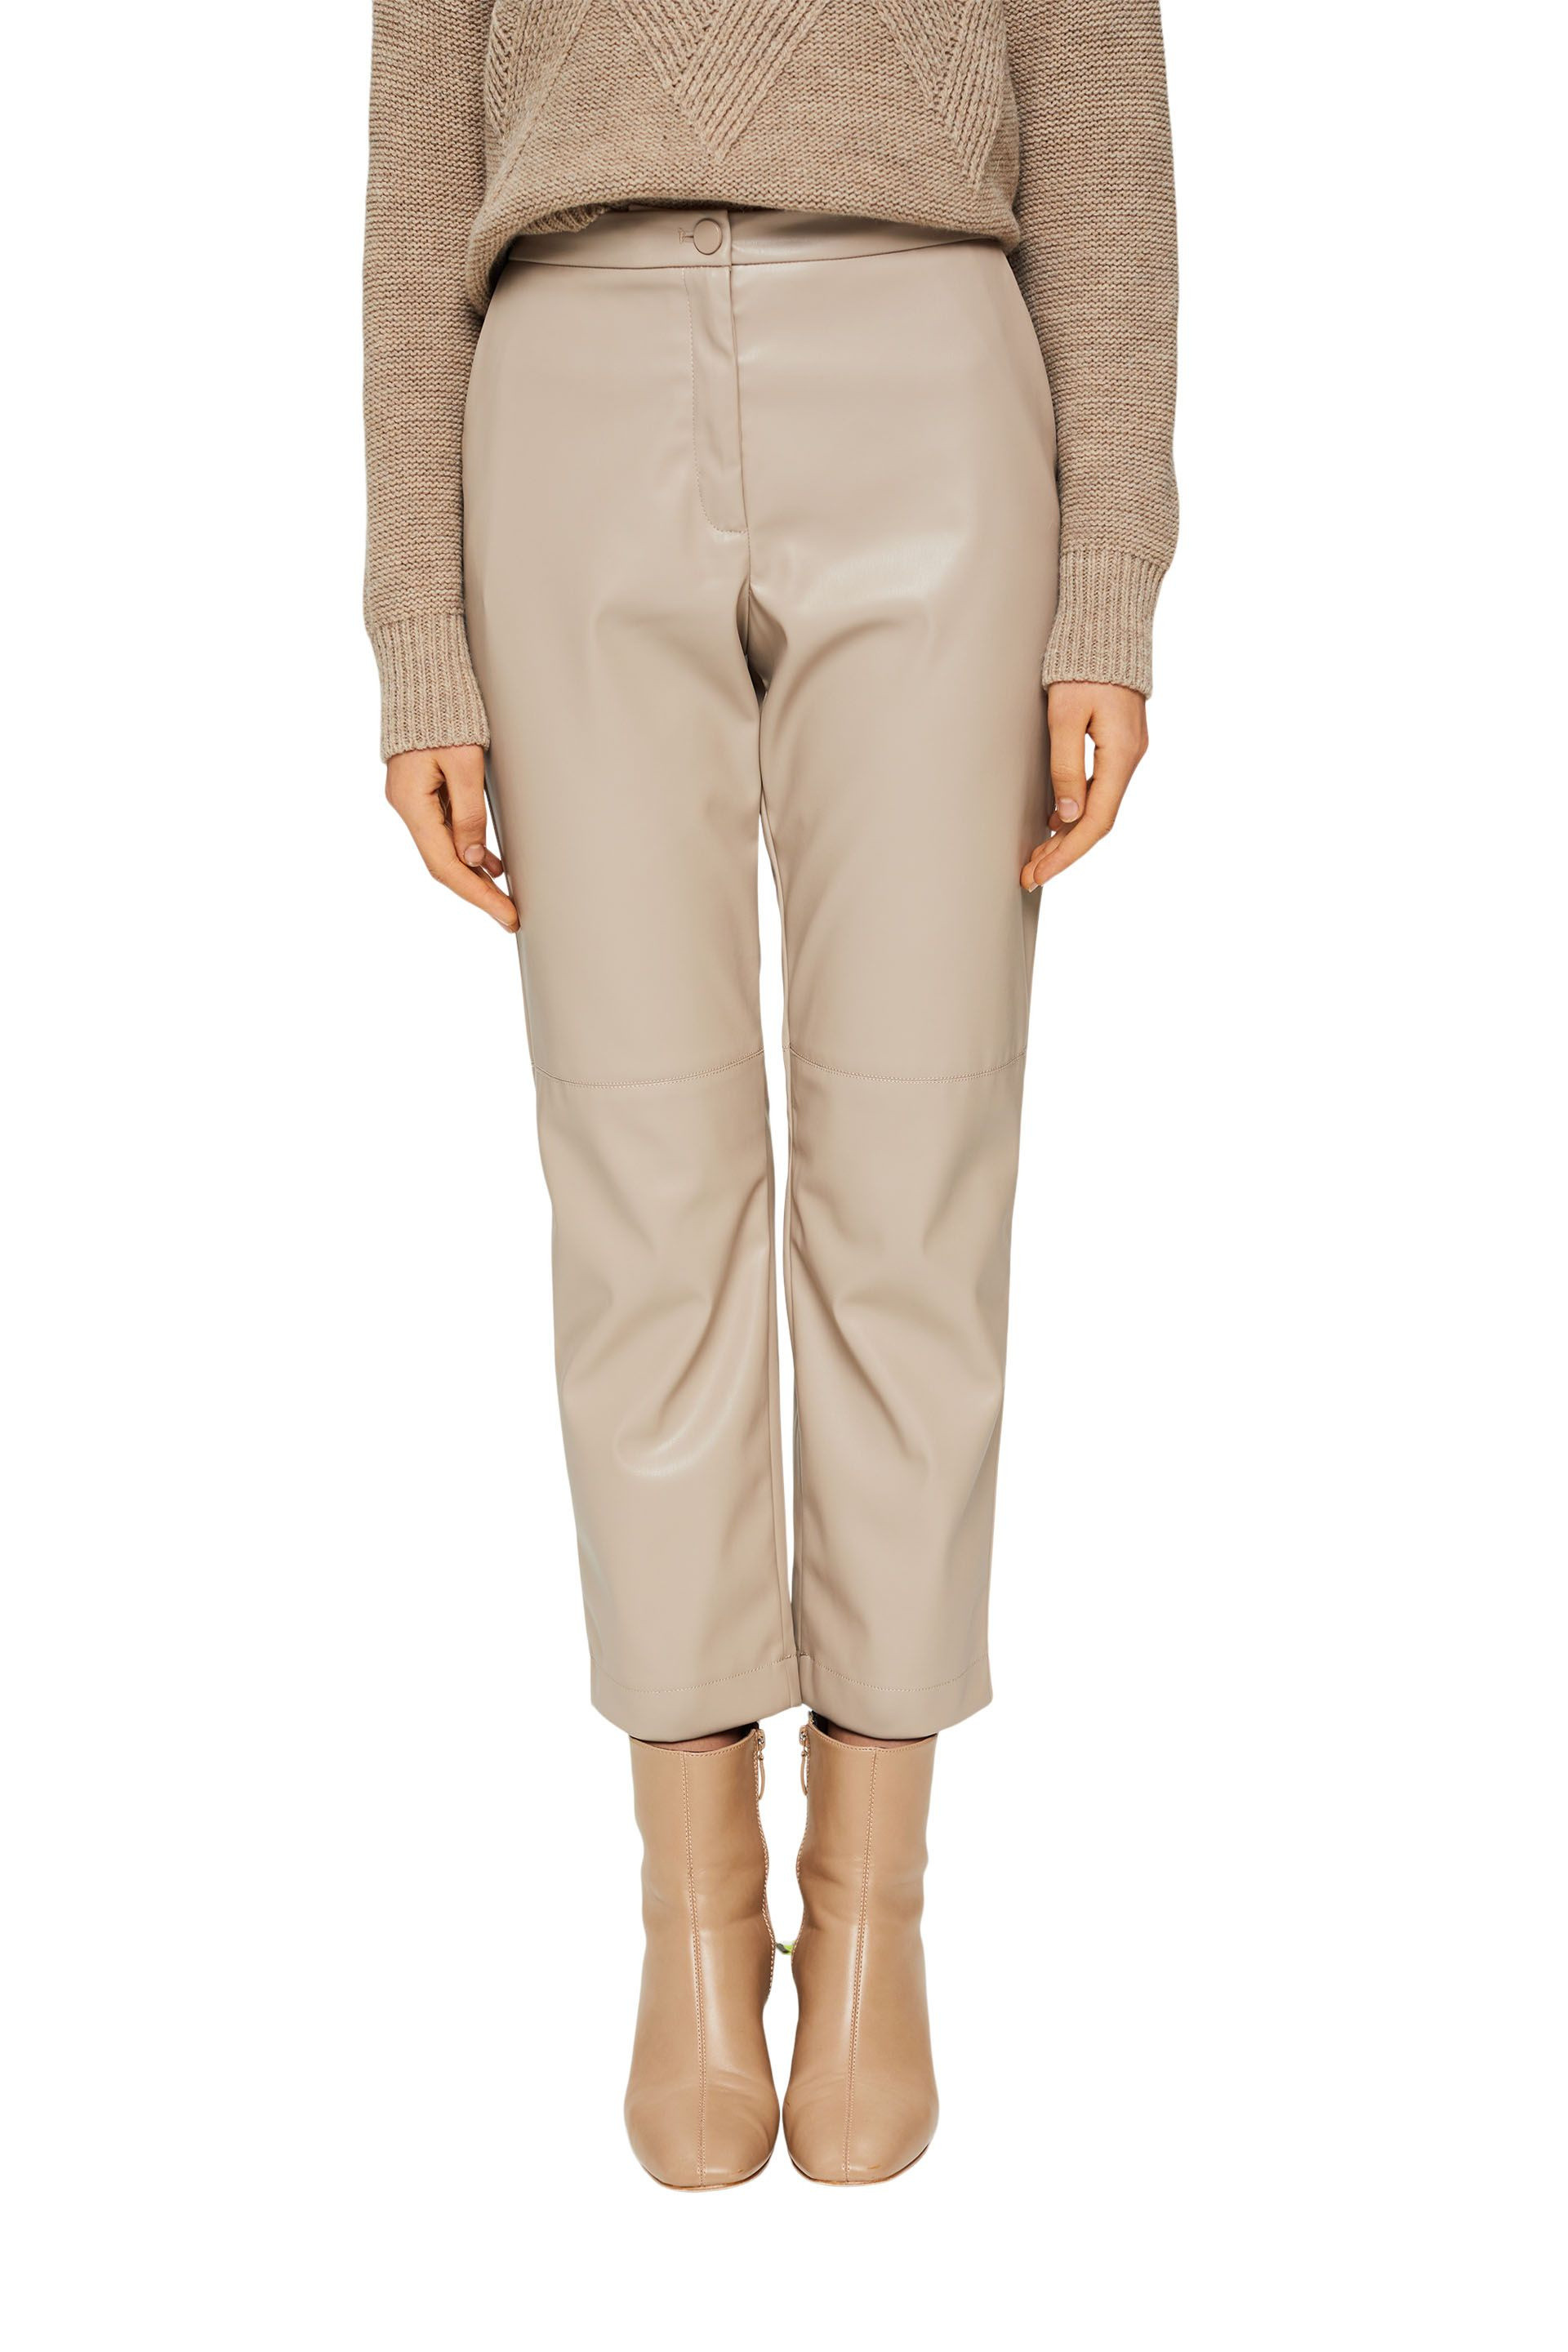 Pantaloni cropped in similpelle, Beige chiaro, large image number 1